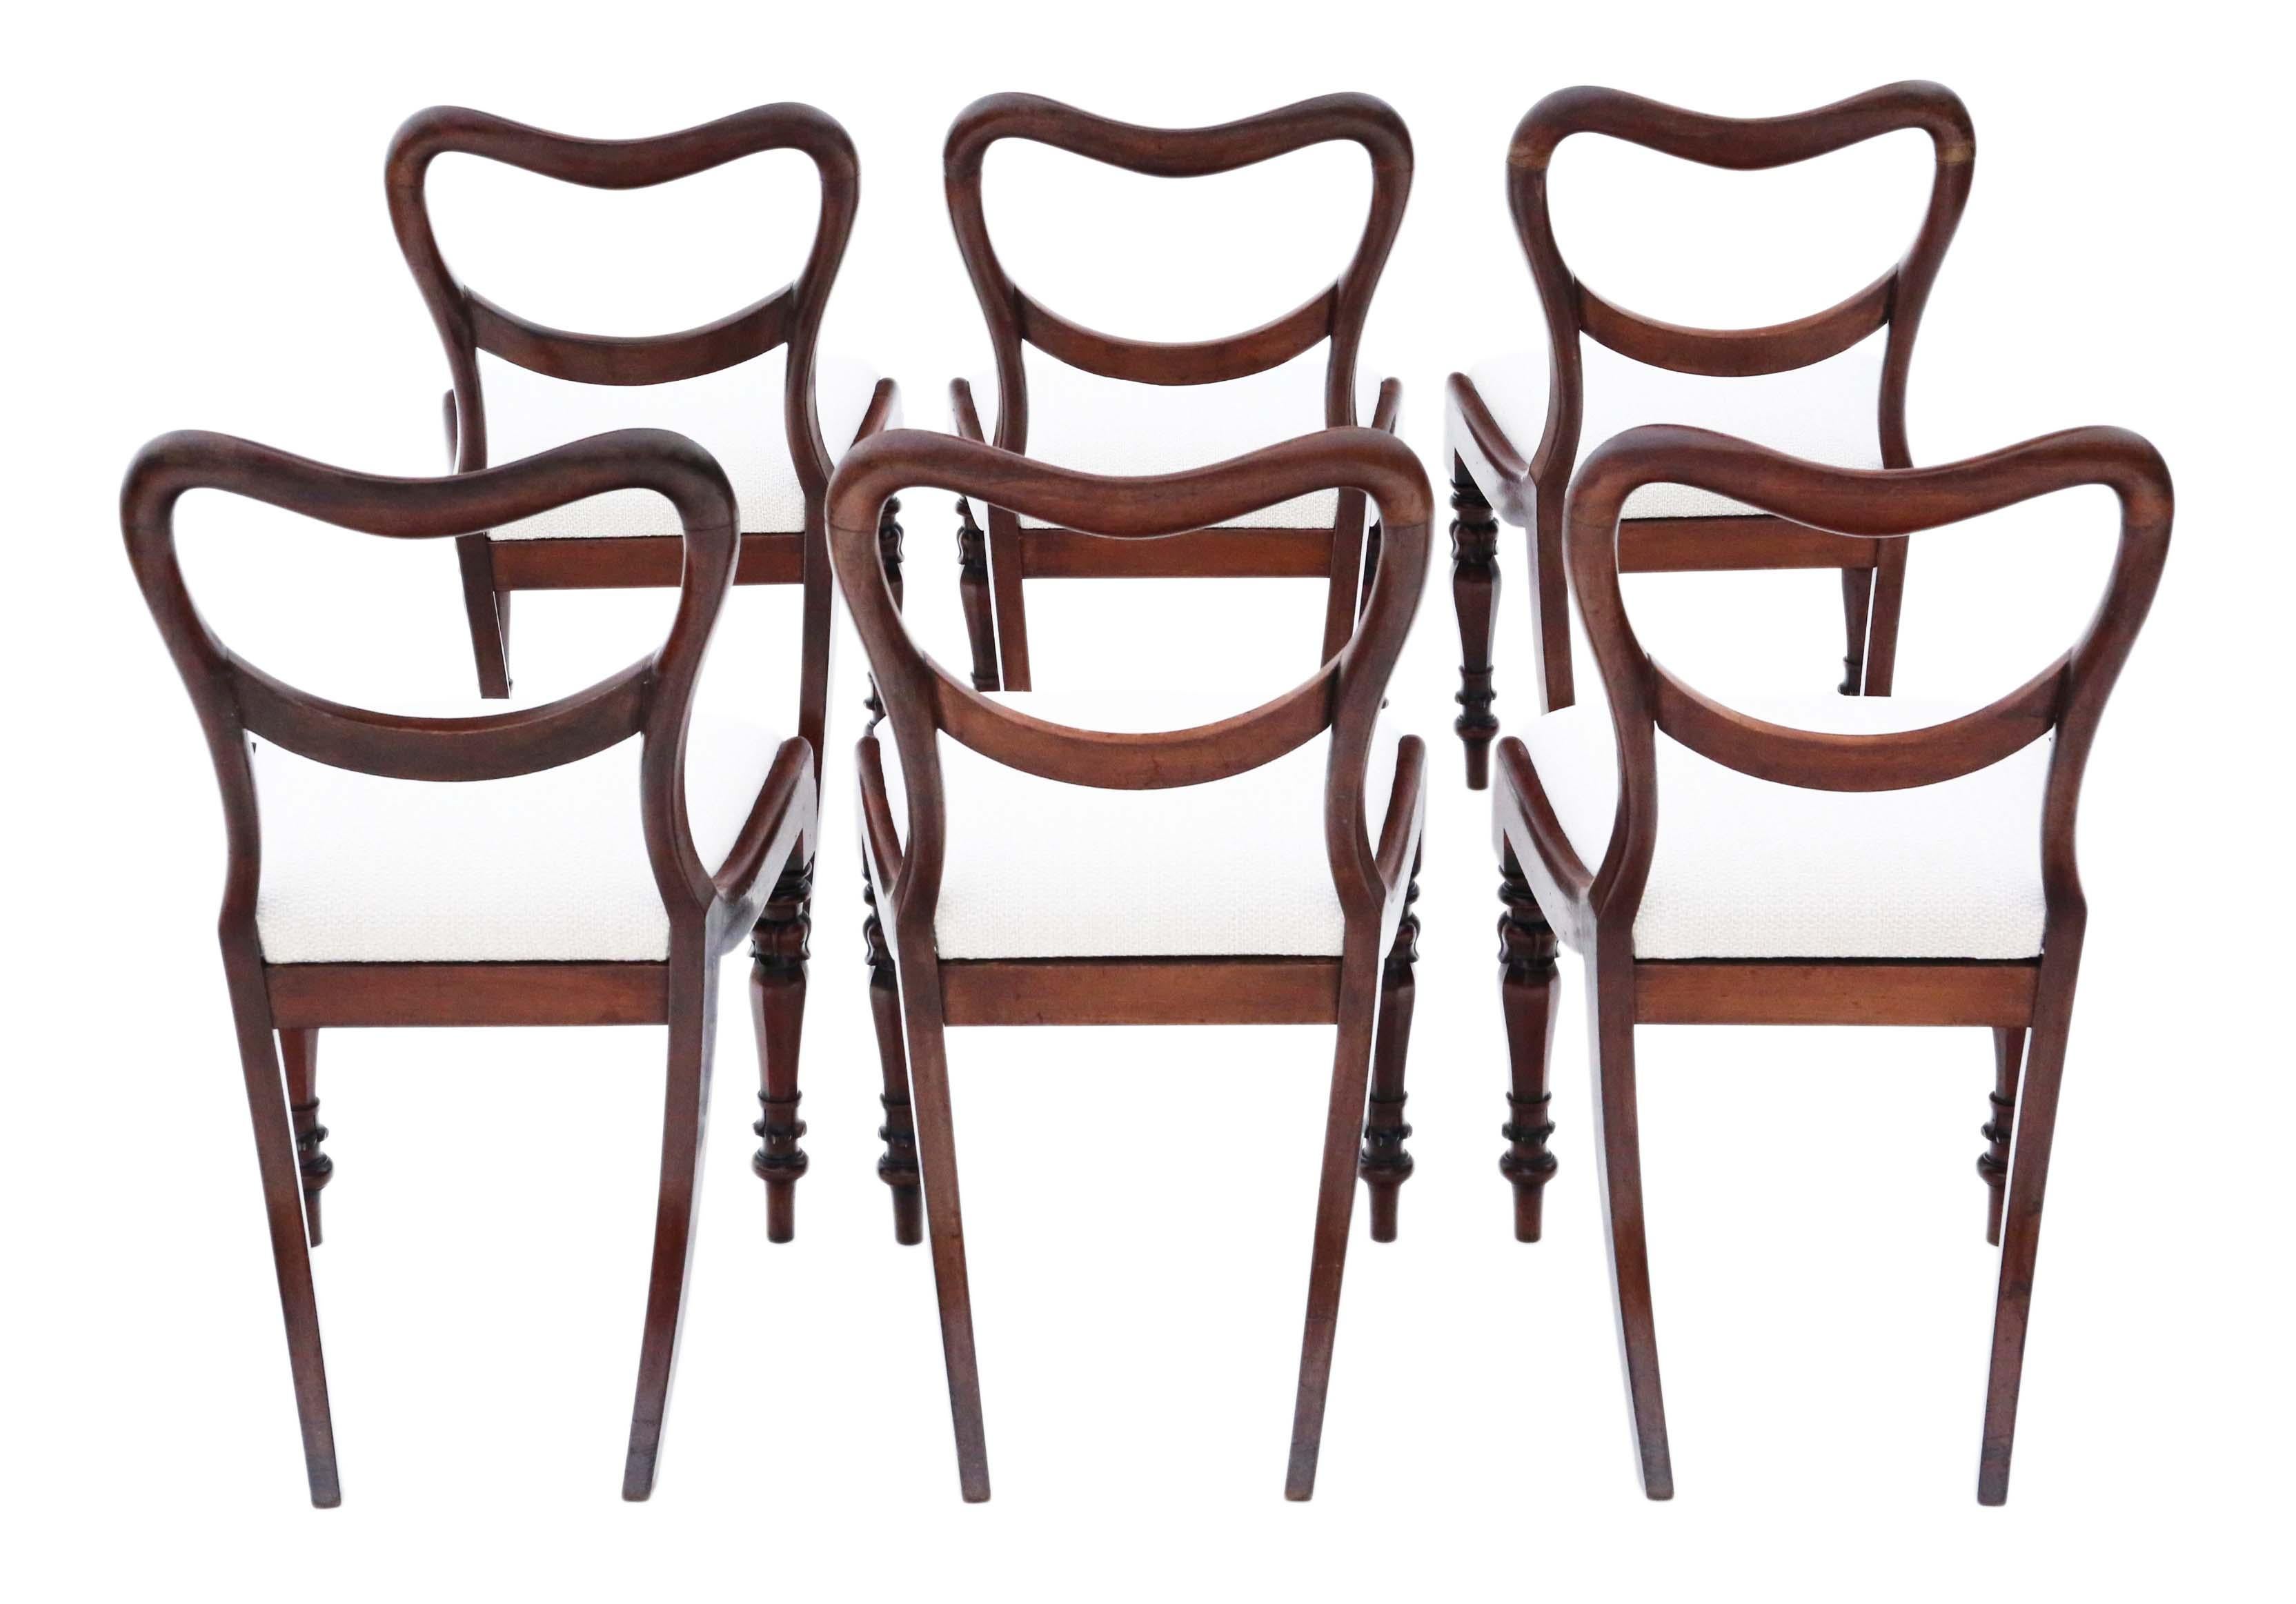 Antique quality set of 6 William IV mahogany balloon back dining chairs, circa 1835.

Solid, with no loose joints. Lovely elegant, but simple design.

Professionally reupholstered.

Overall maximum dimensions:

47cm W x 50cm D x 84cm H (46cm